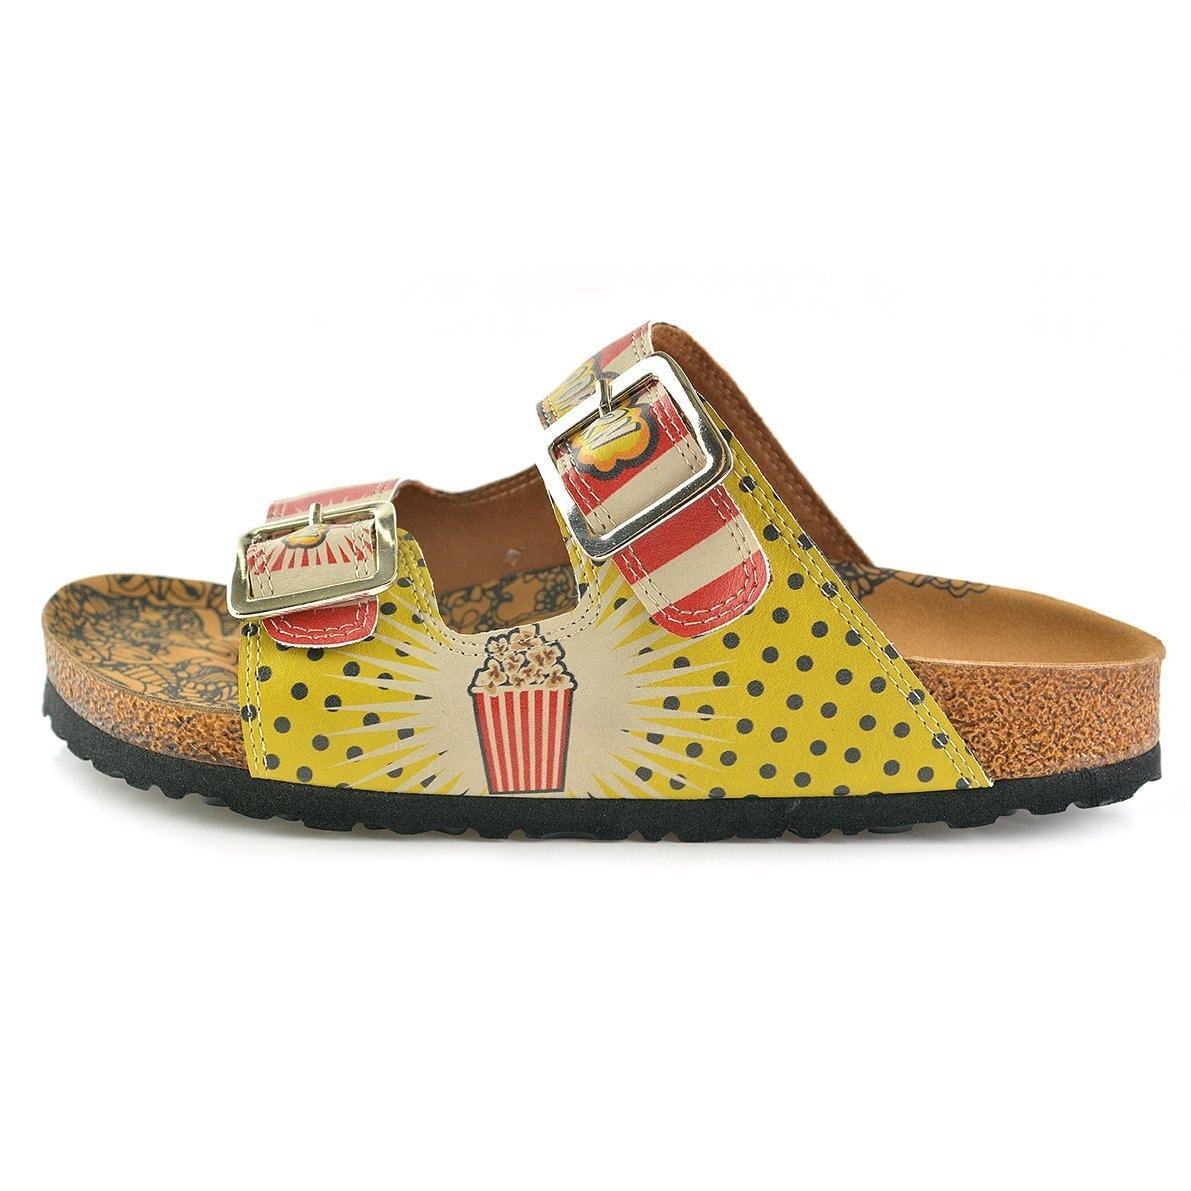 Red & Yellow Popcorn Two-Strap Buckle Sandal CAL203 (737682718816)